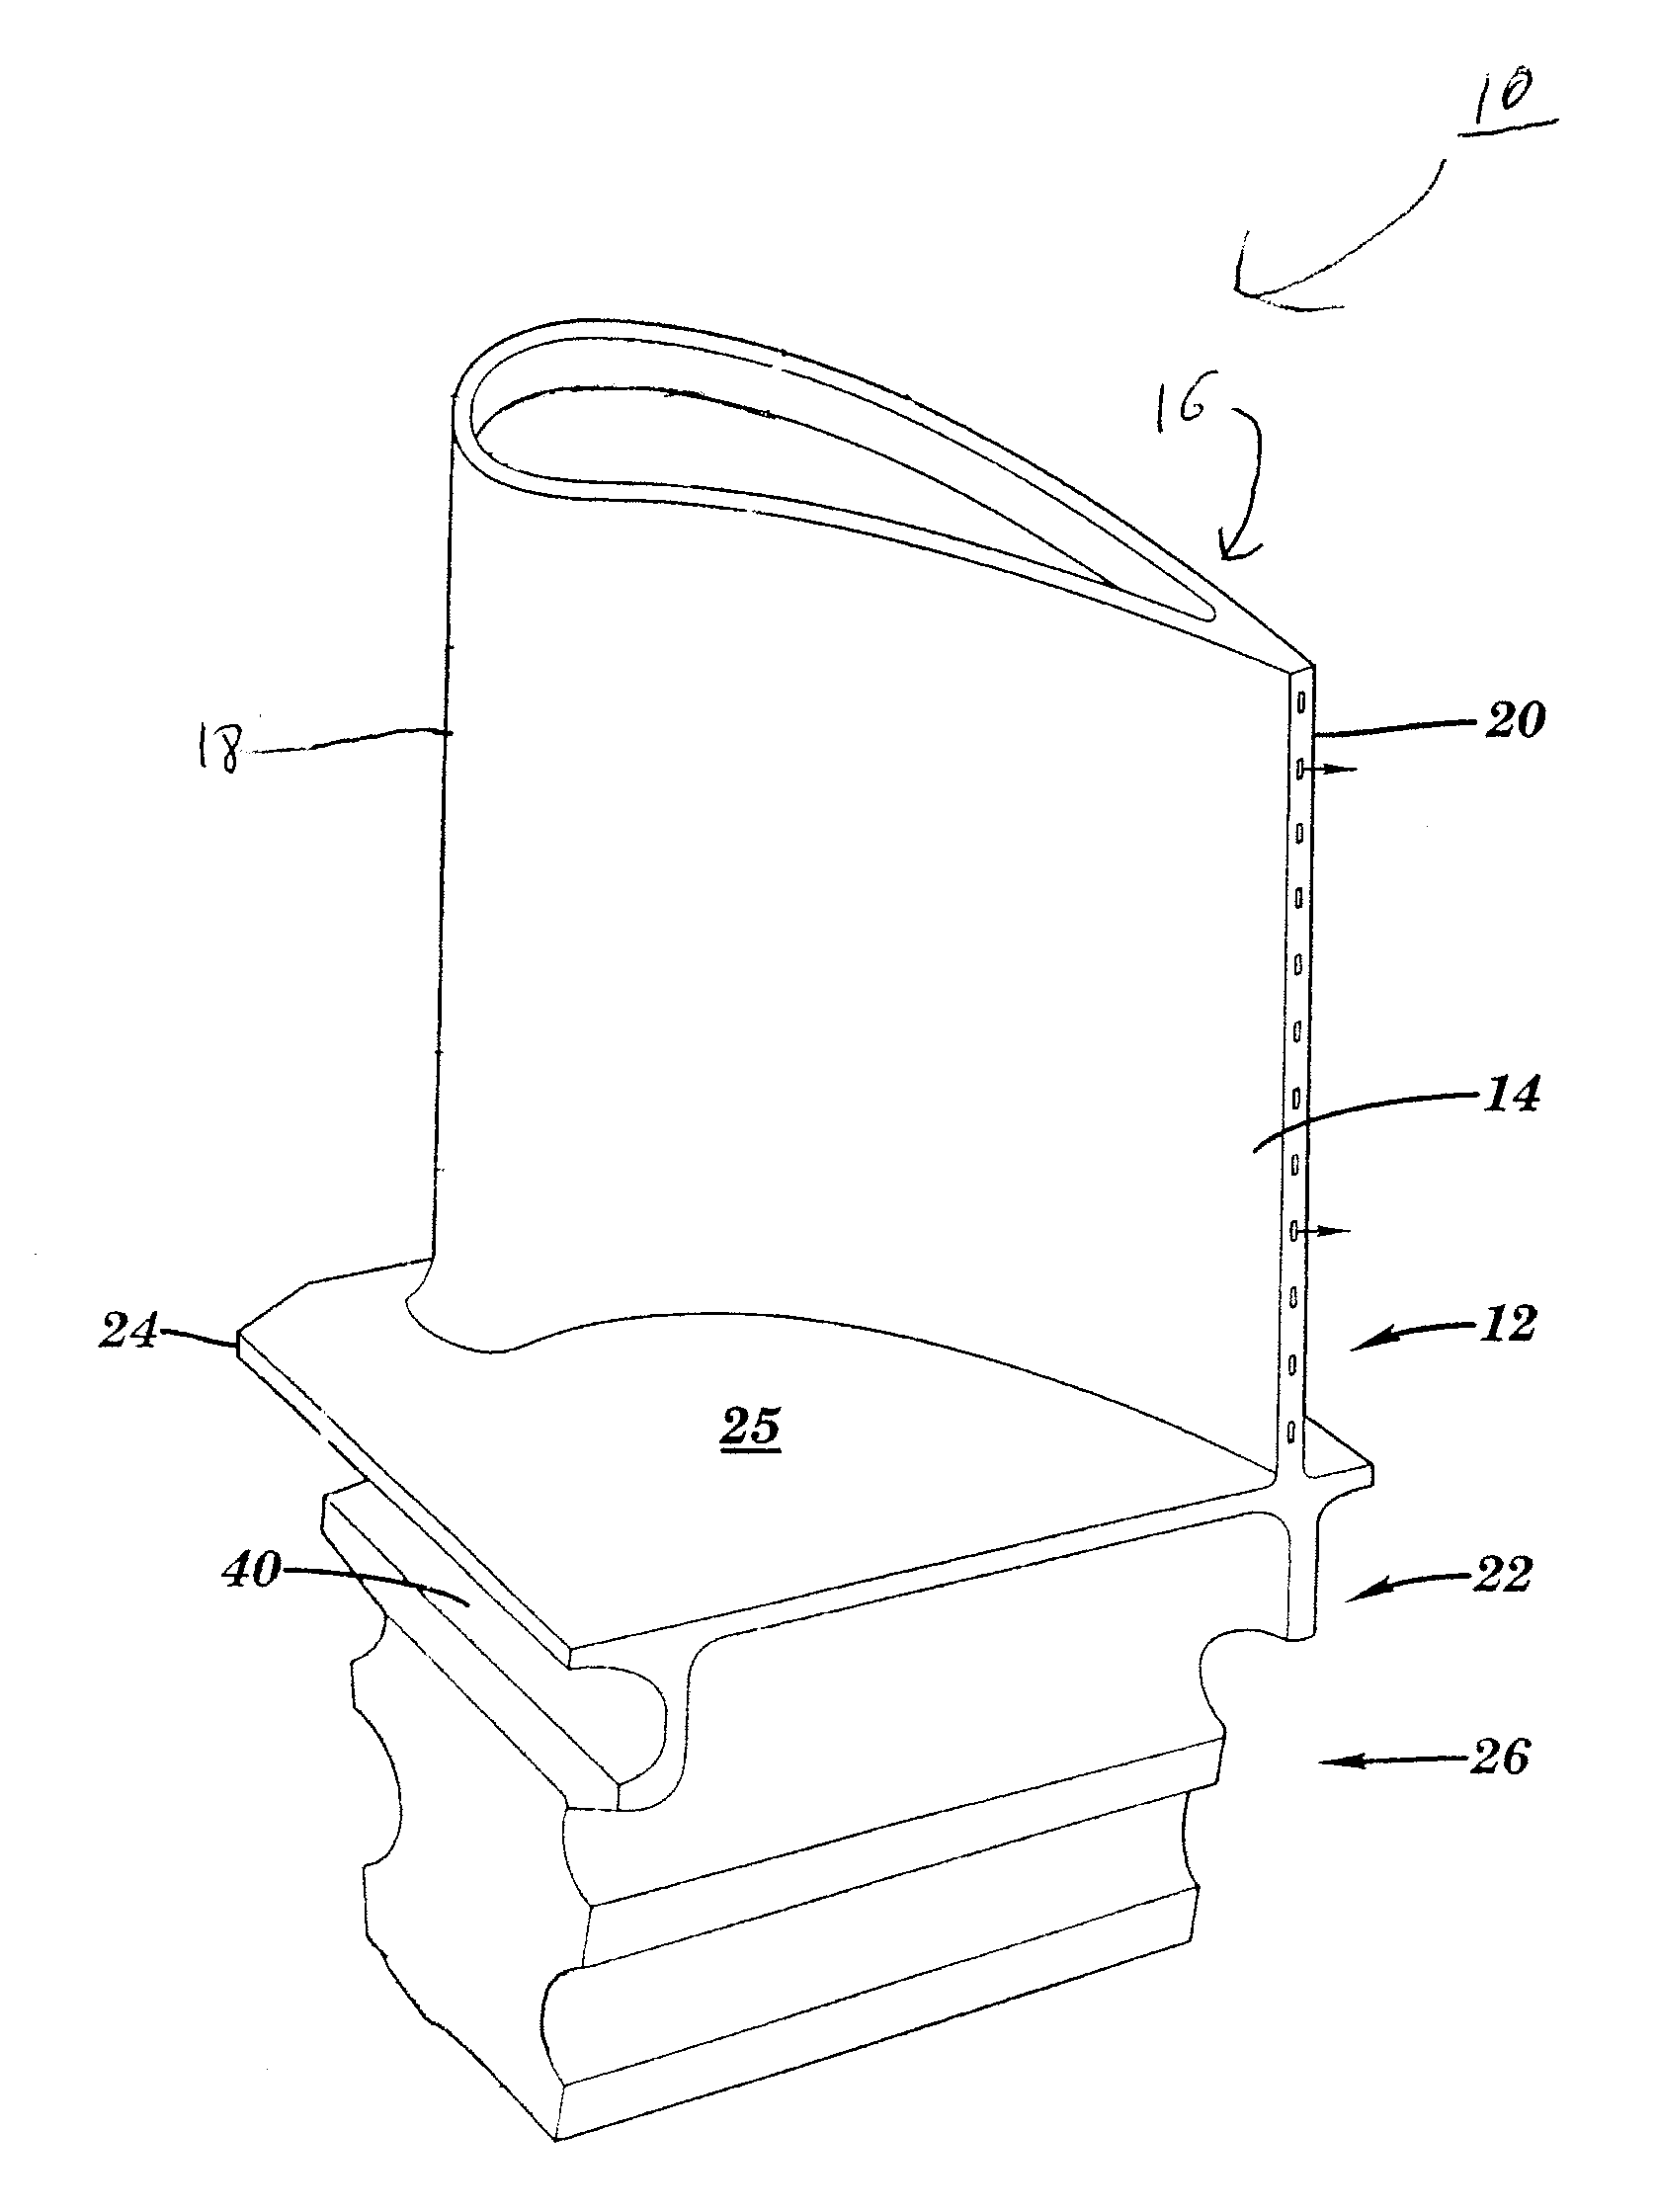 Method for applying ceramic coatings to smooth surfaces by air plasma spray techniques, and related articles